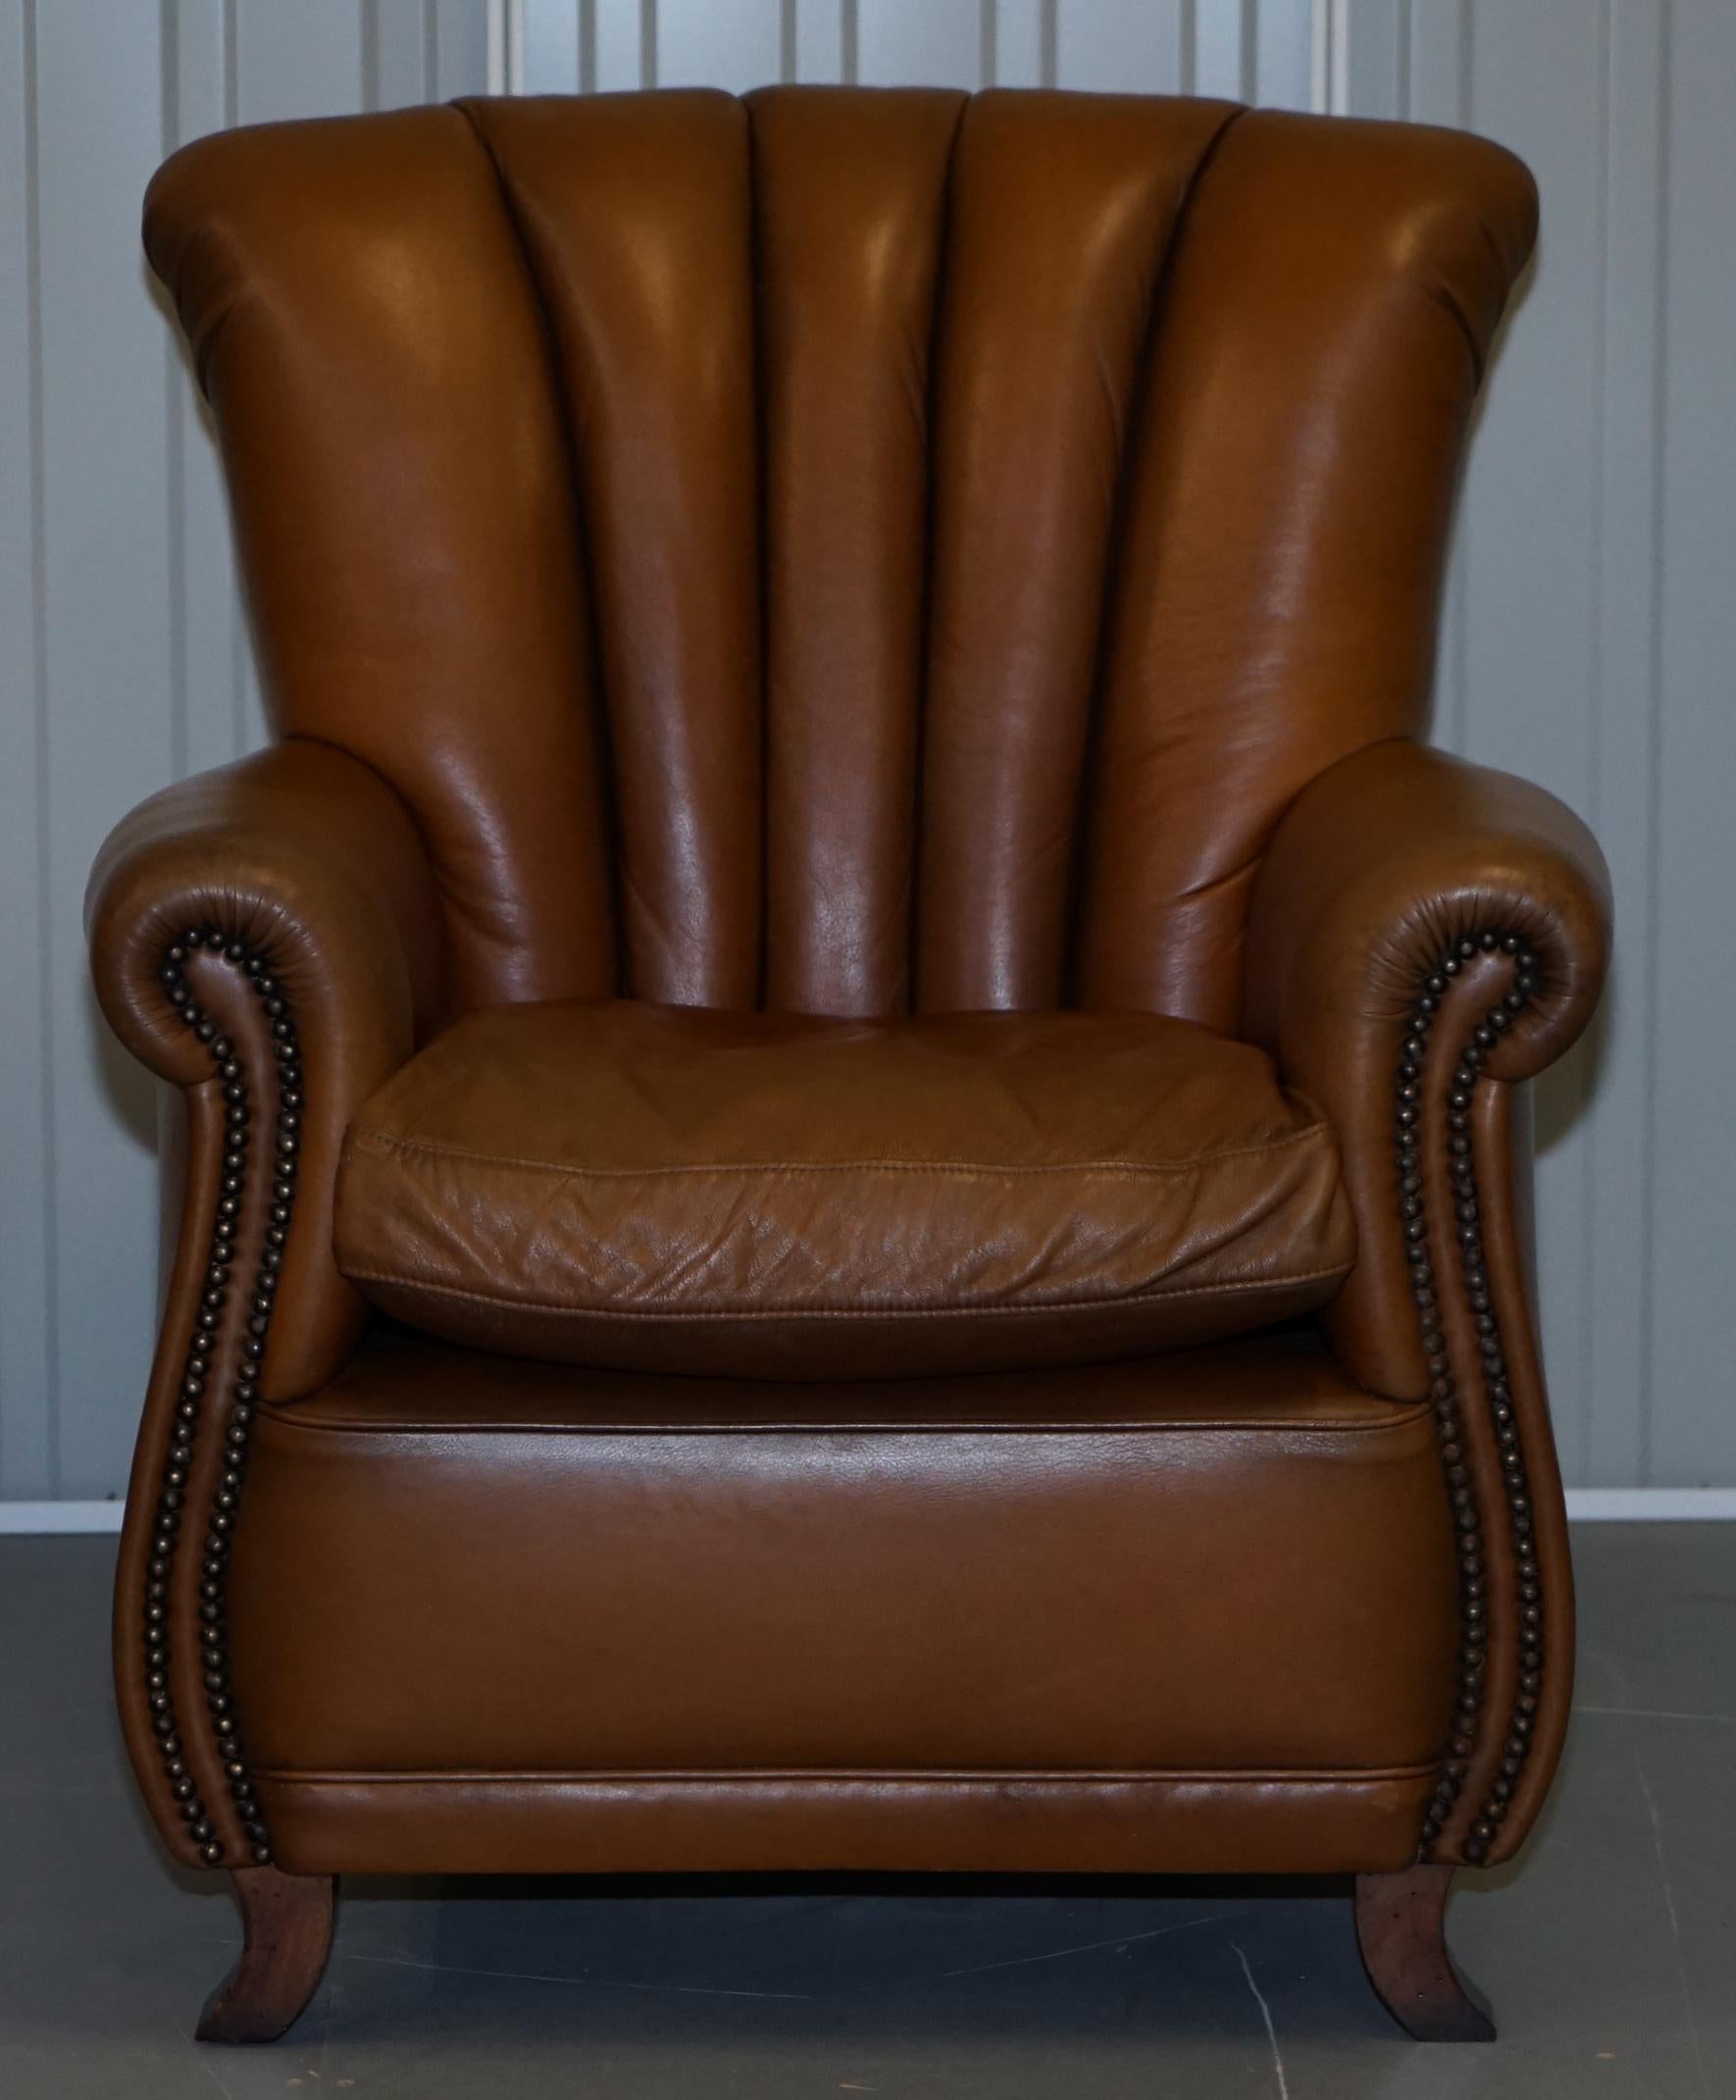 English Lovely Pair of Tan Brown Leather Tetra Ella Armchairs with Art Deco Fluted Backs